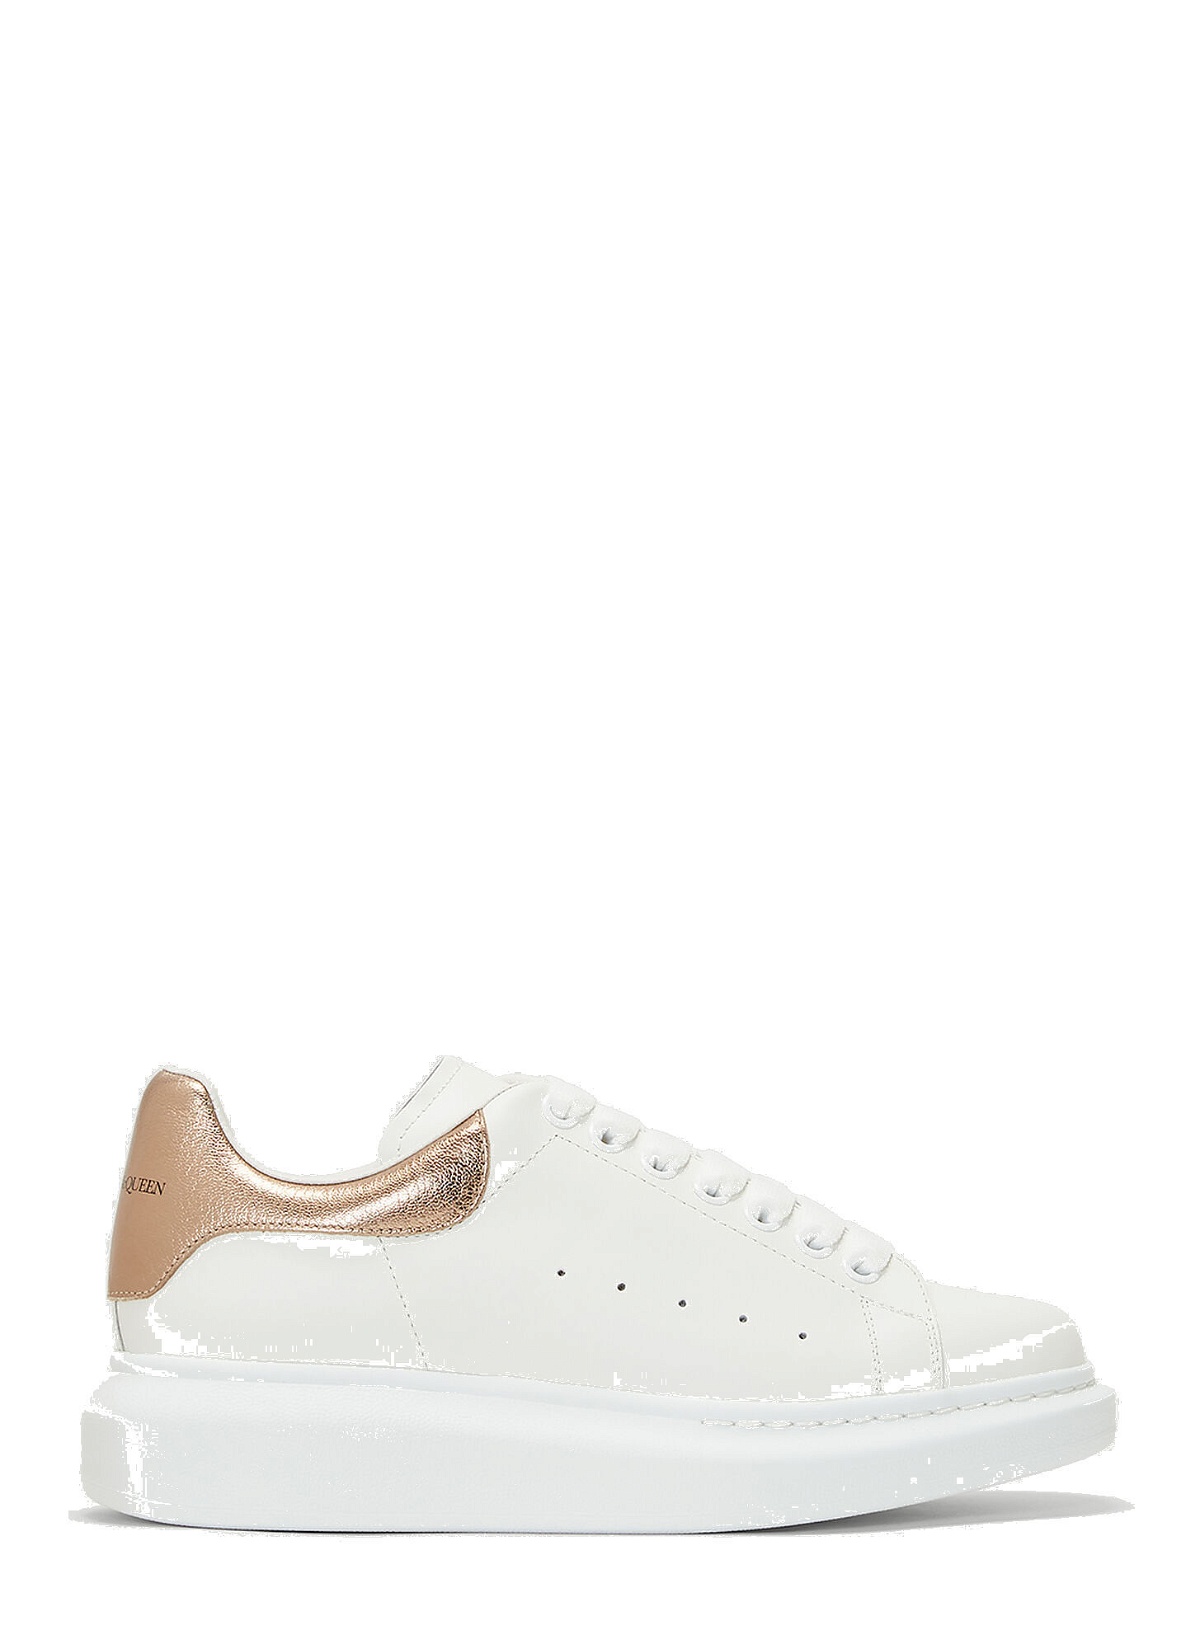 Photo: Larry Leather Sneakers in White